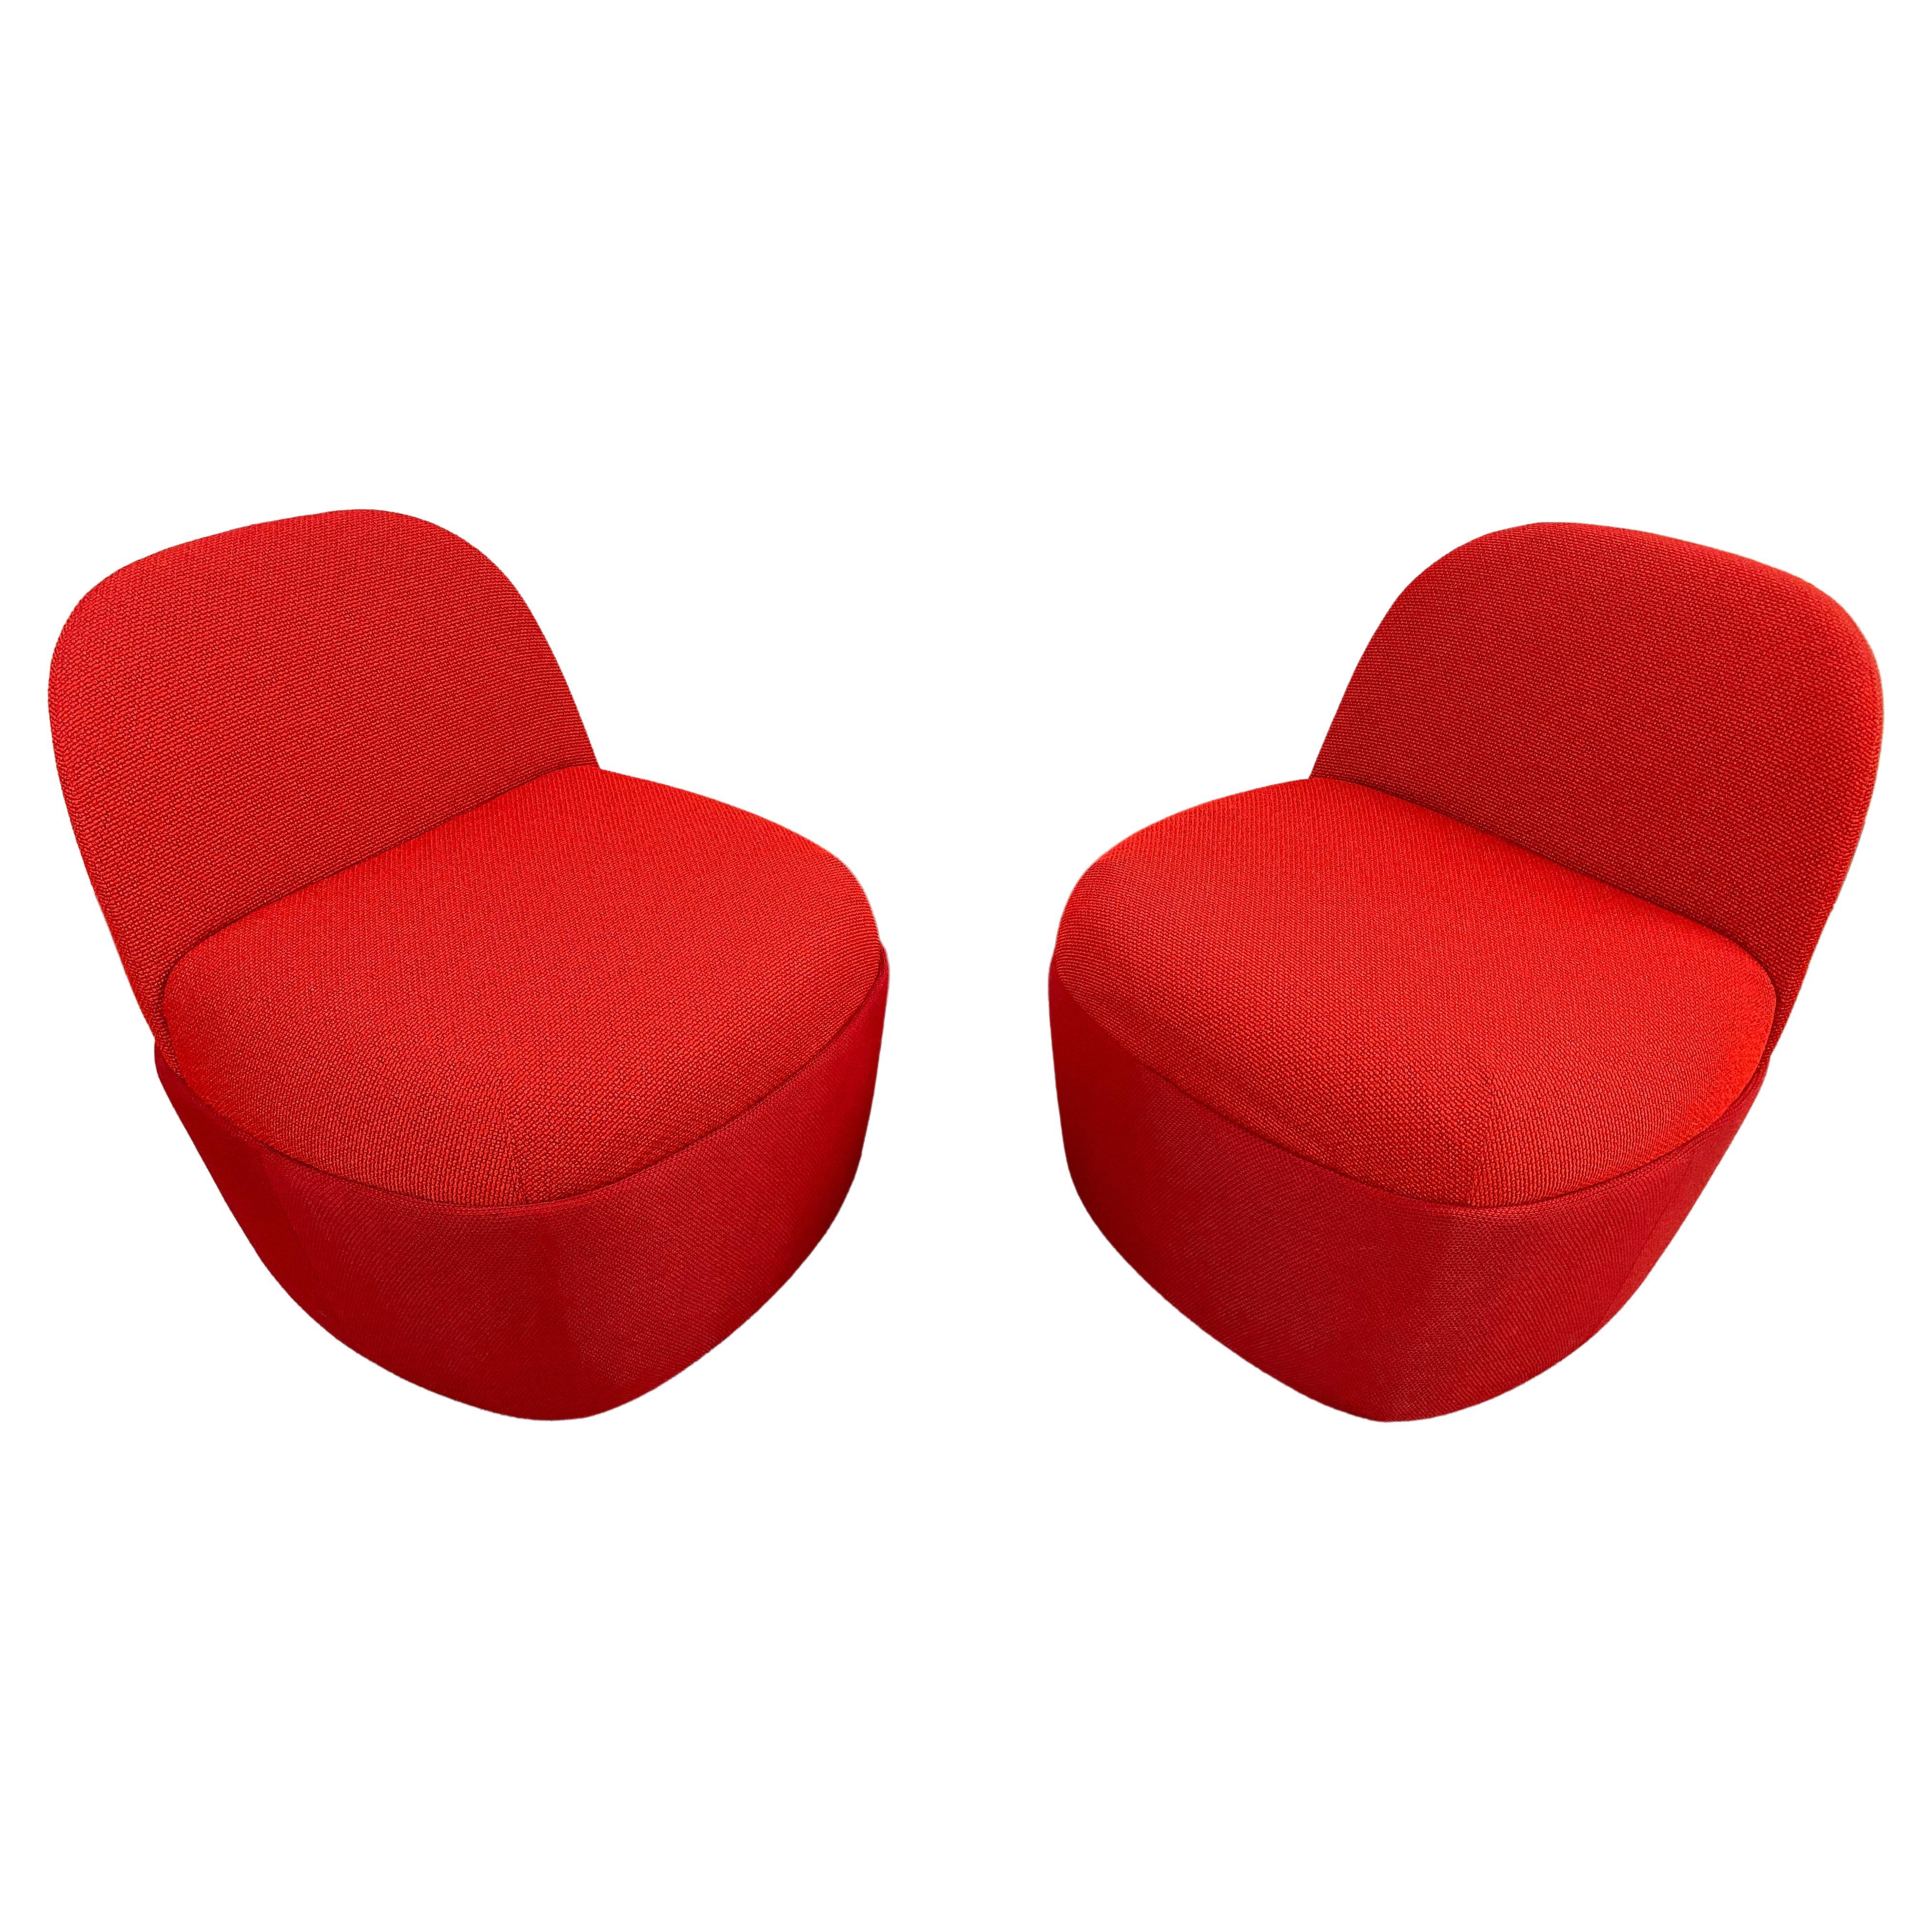 A whimsical modern pair of Studio TK Chest Collection custom slipper chairs or poufs with back in a beautiful red color. The pair of chairs are made of high quality/ grade knit fabric and are very comfortable and well made. Perfect for both home or